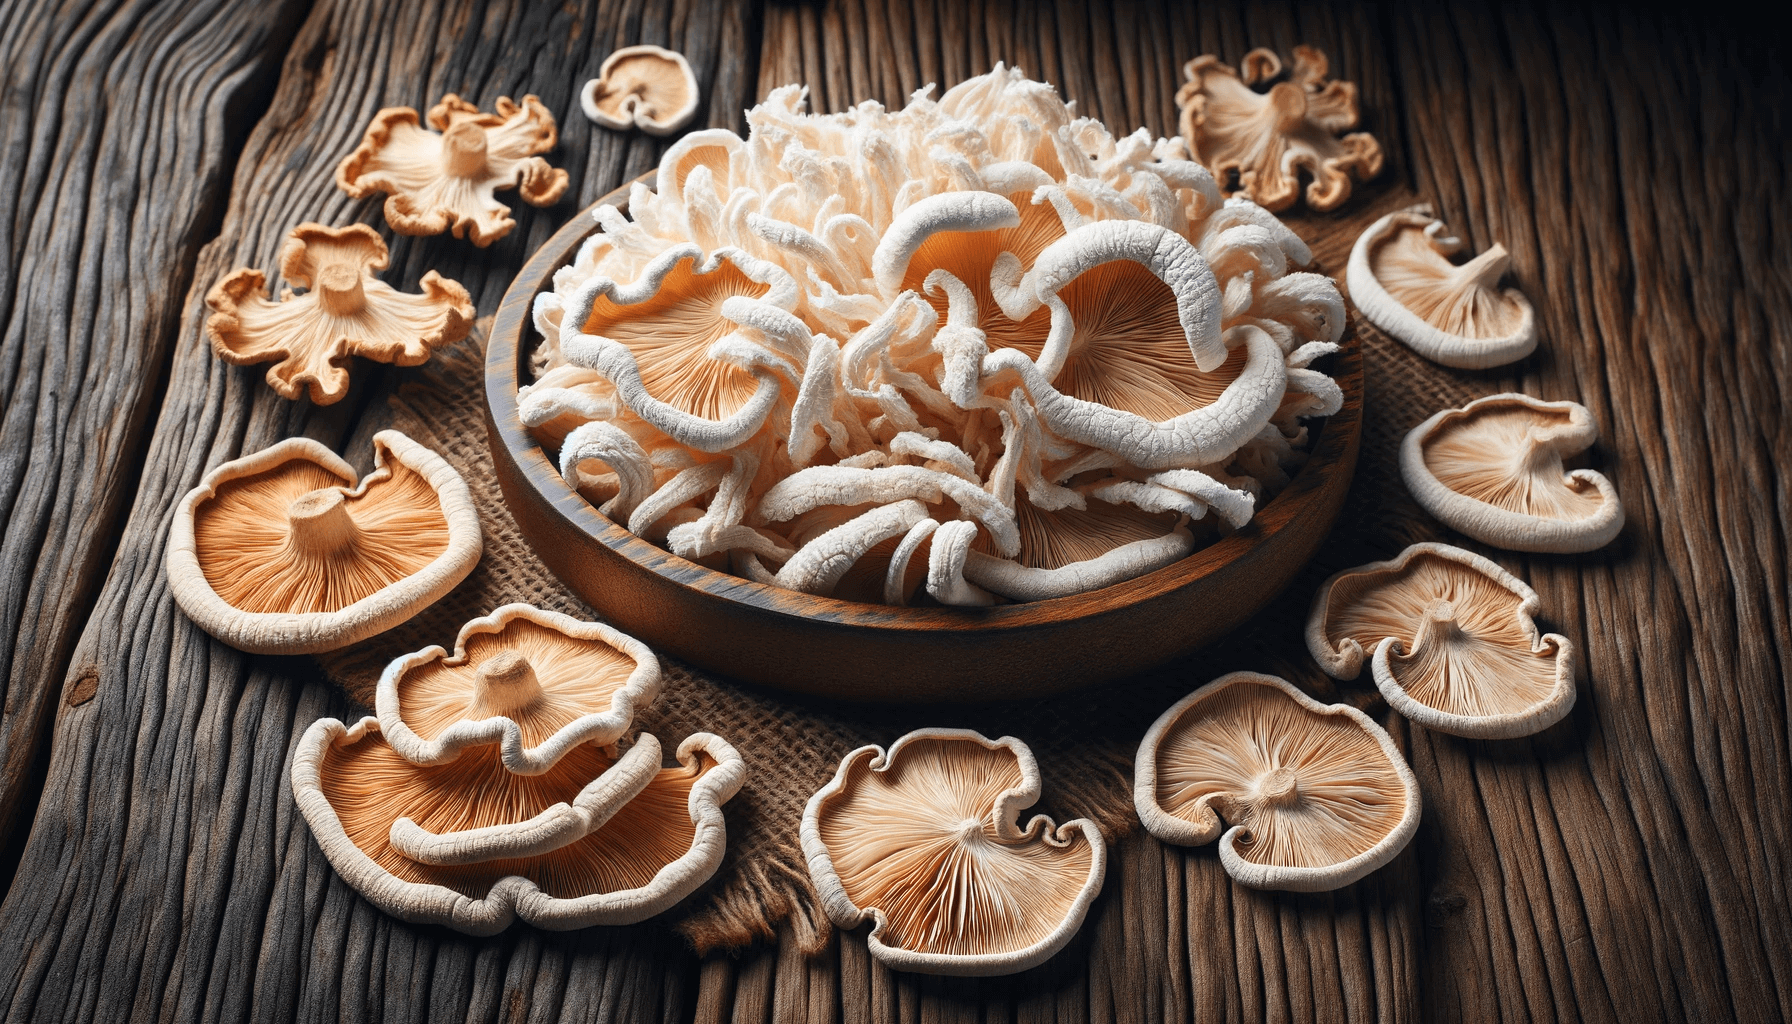 Dried Lion's Mane mushroom slices spread out on a rustic wooden surface. The dried pieces are light brown and curled, contrasting against the wooden background.